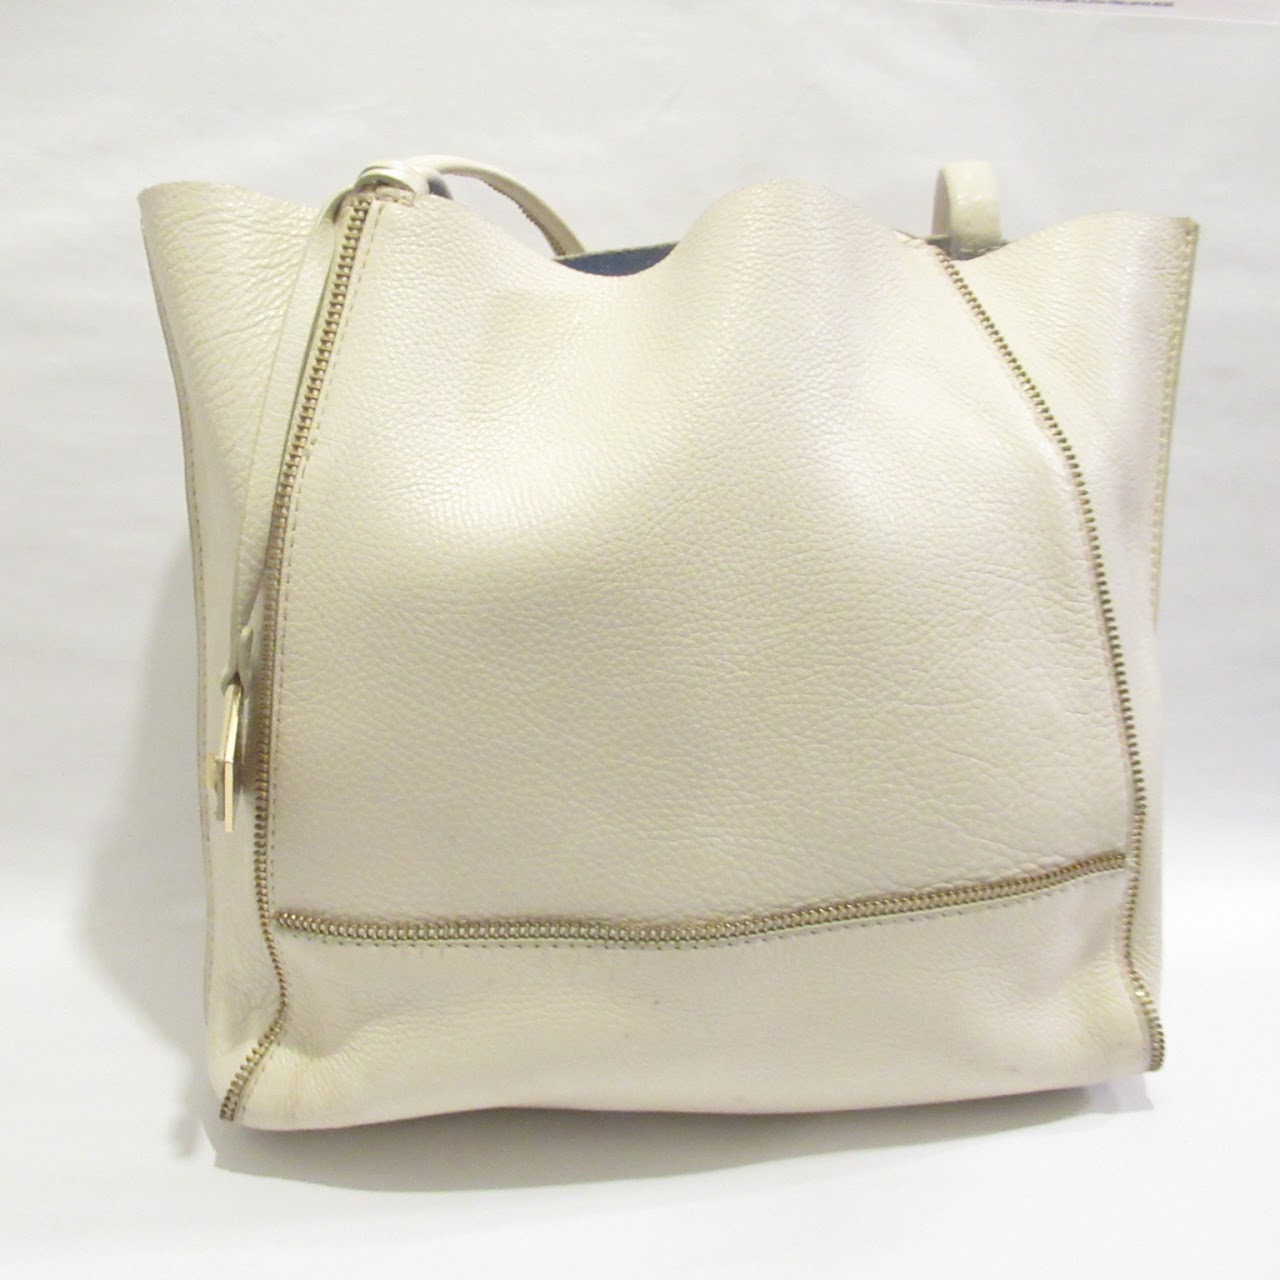 Botkier White Leather Shoulder Tote